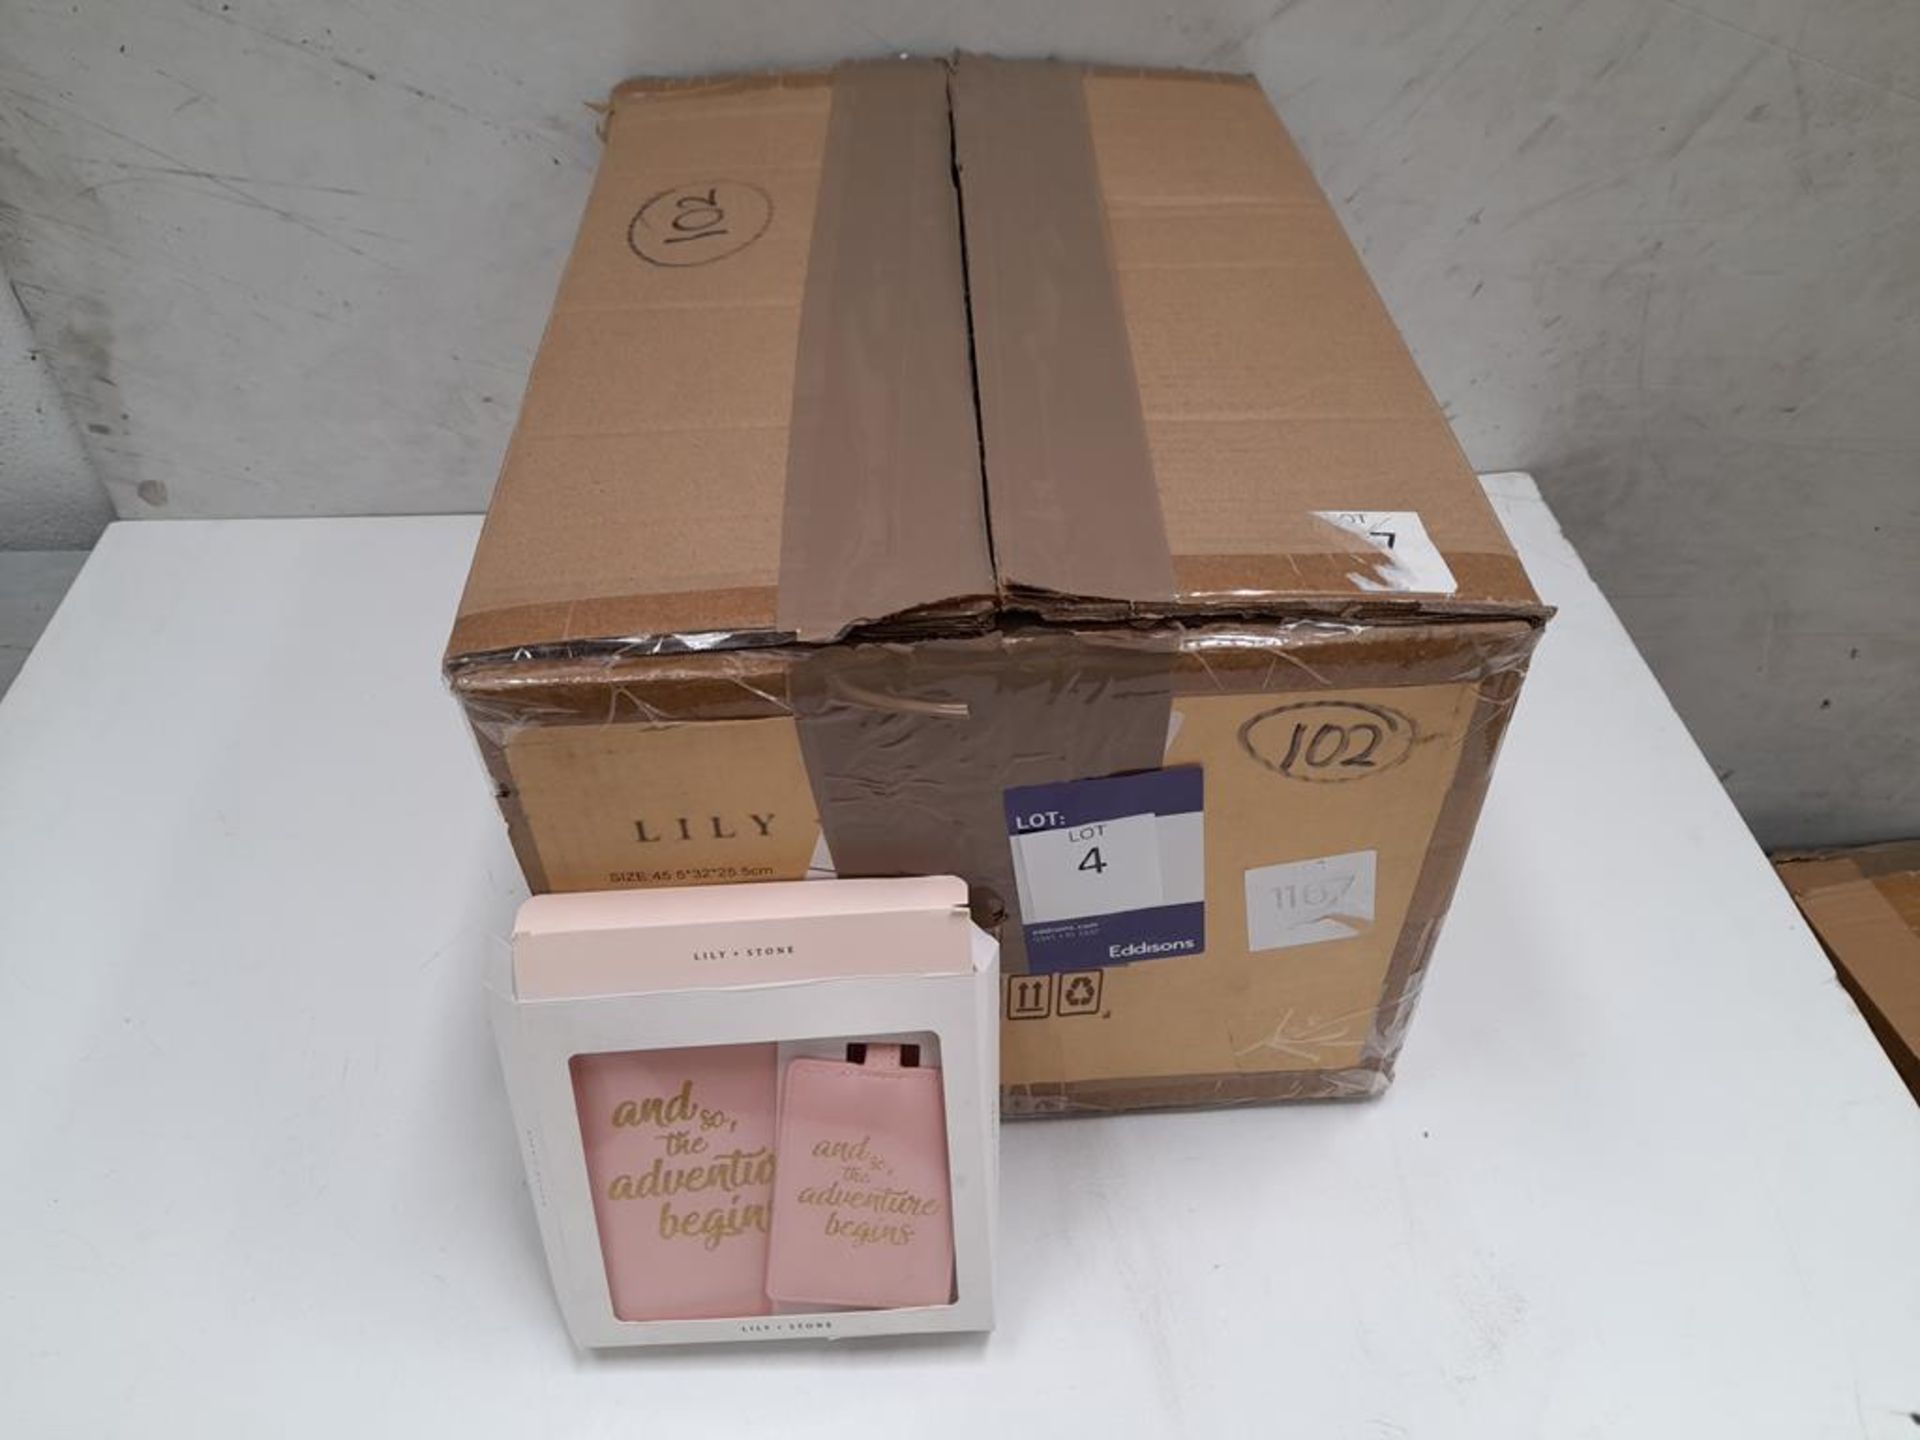 A box of Lily and Stone 'Passport holder and tag s